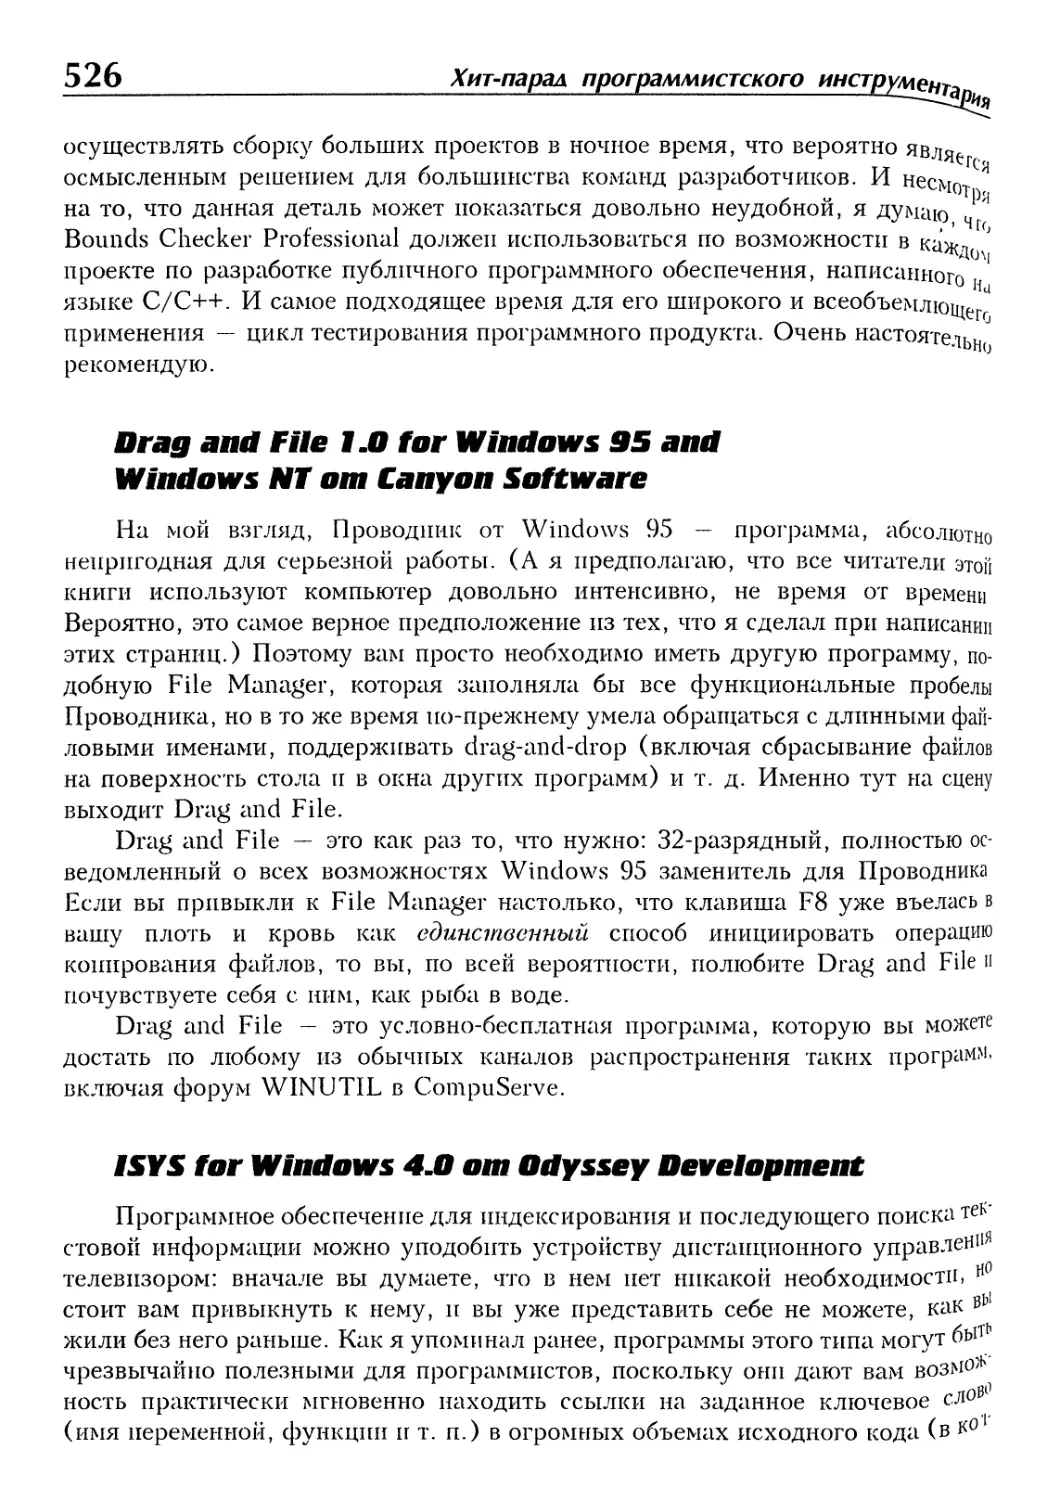 Drag and File 1.0 for Windows 95 and Windows NT от Canyon Software
ISYS for Windows 4.0 от Odyssey Development